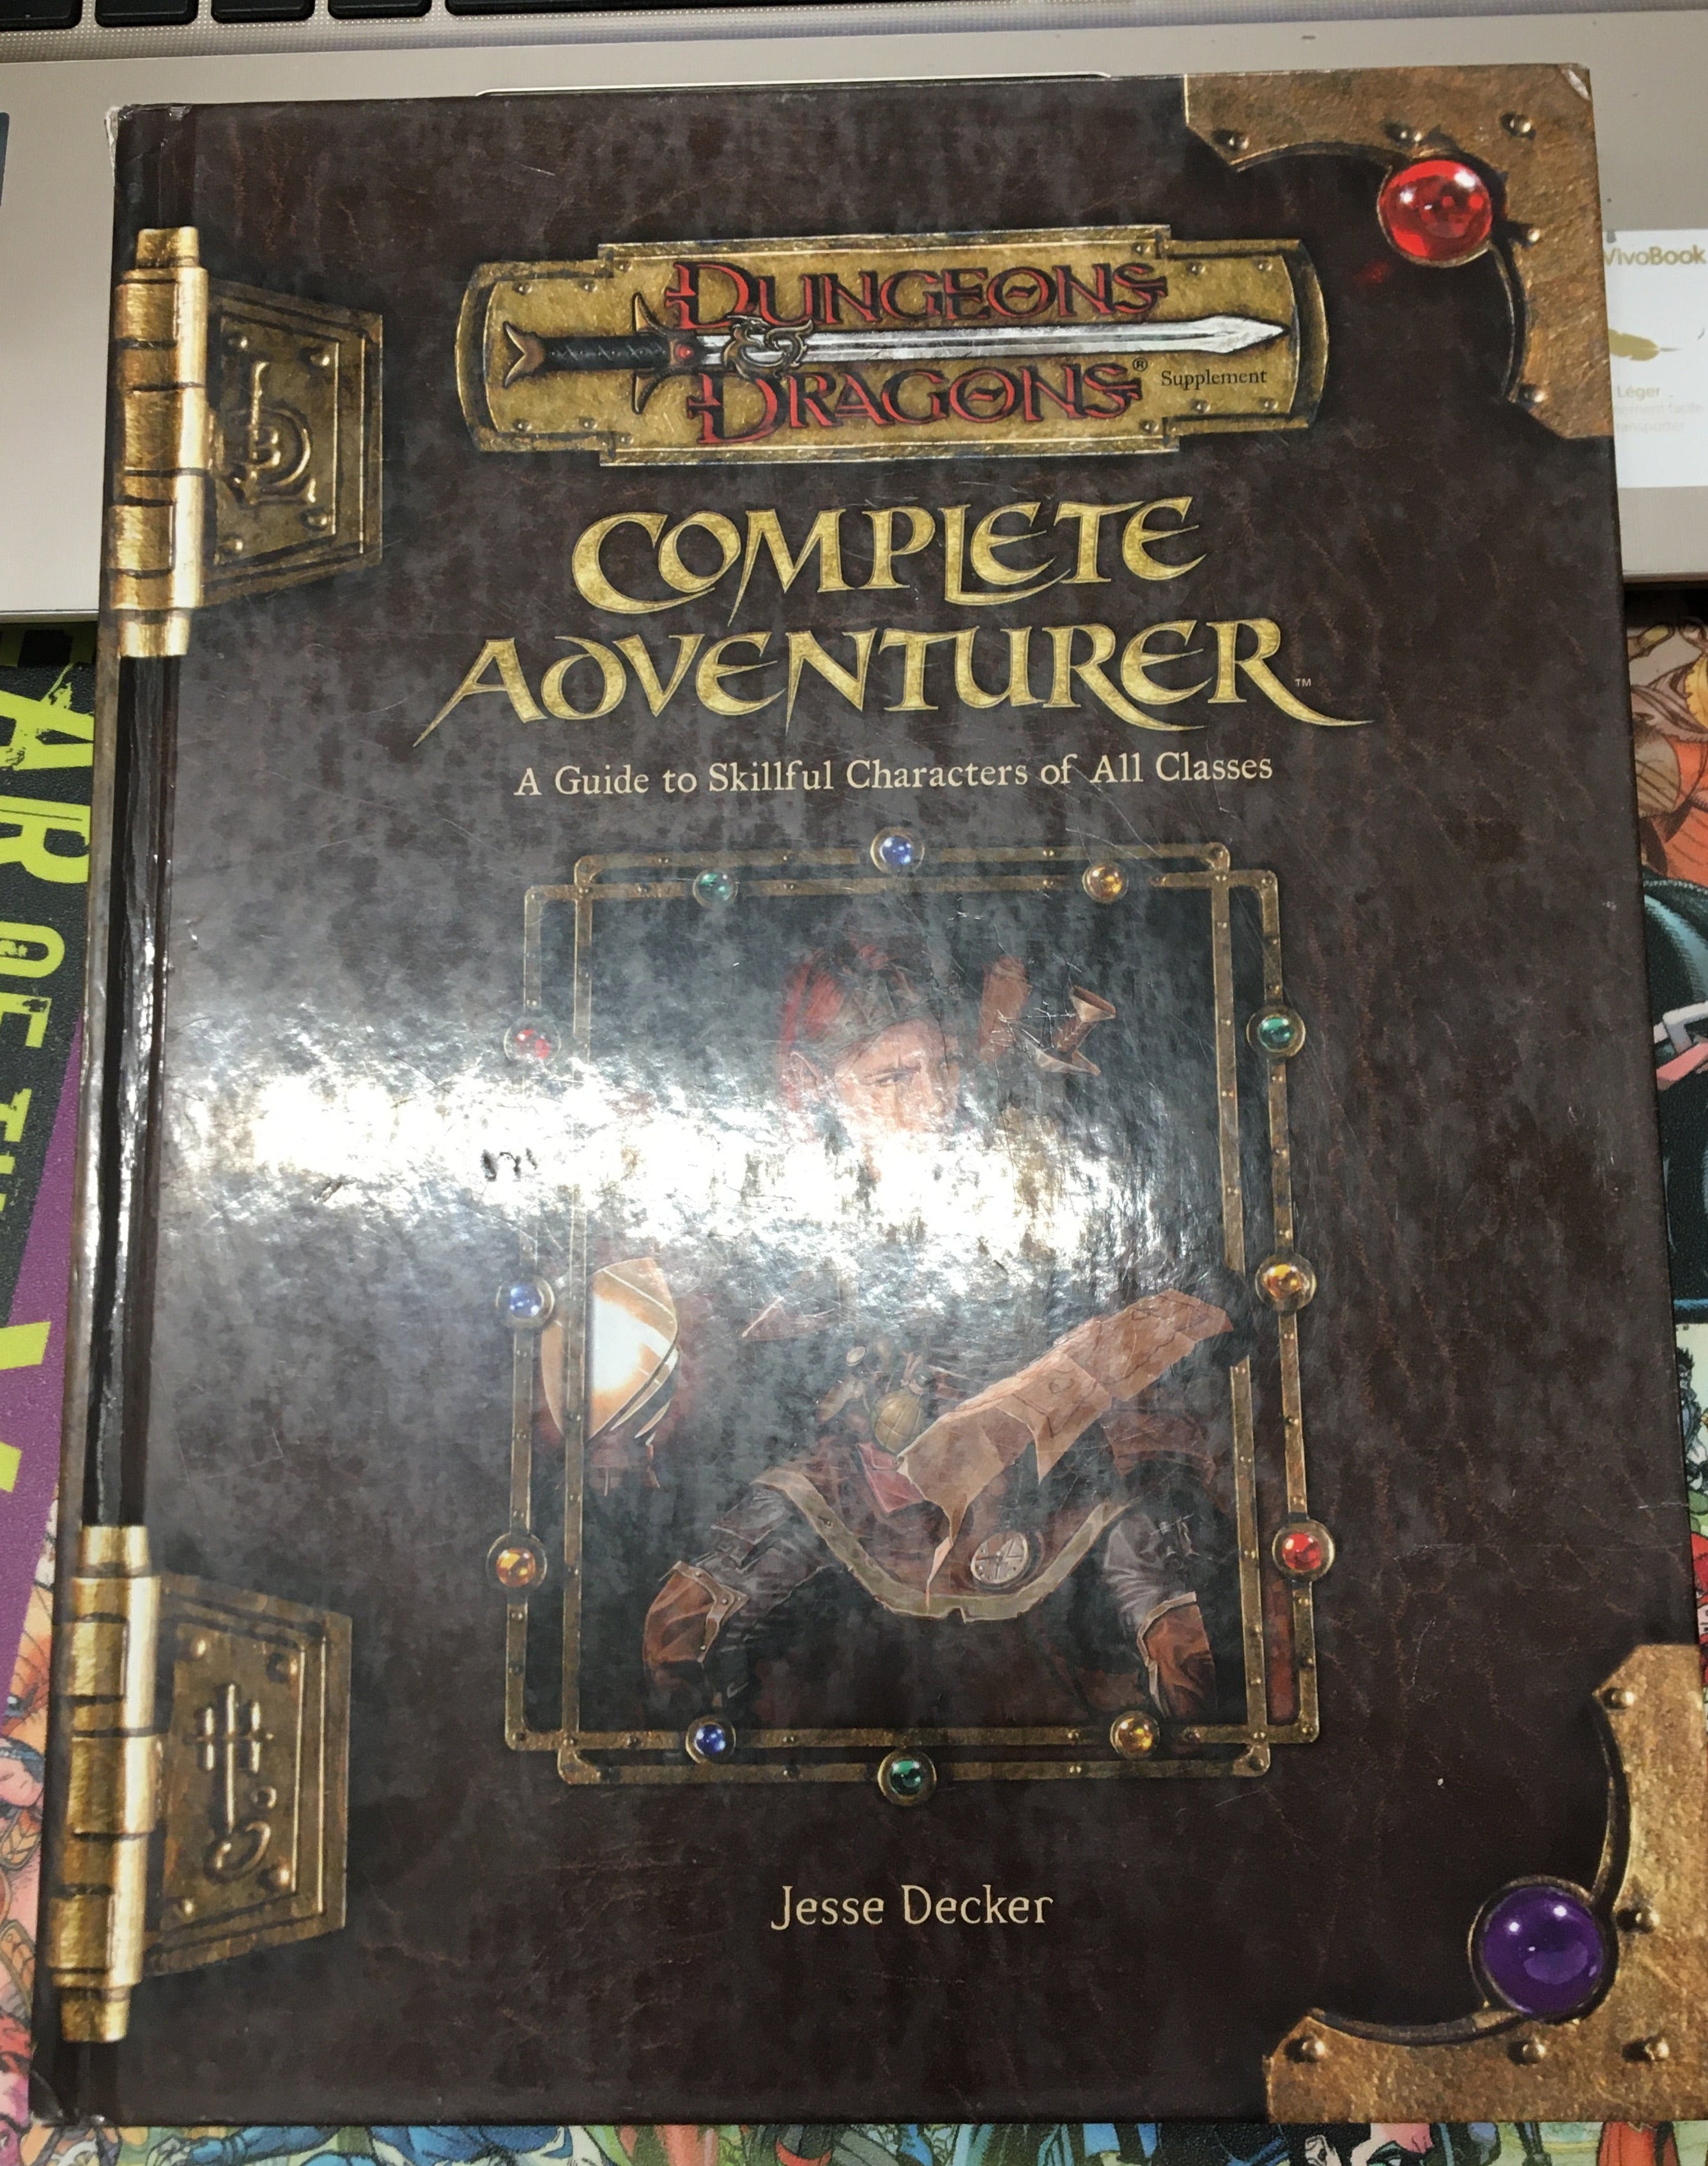 Complete Adventurer: A Guide to Skillful Characters of All Classes (Dungeons & Dragons d20 3.5 Fantasy Roleplaying Supplement) | L.A. Mood Comics and Games